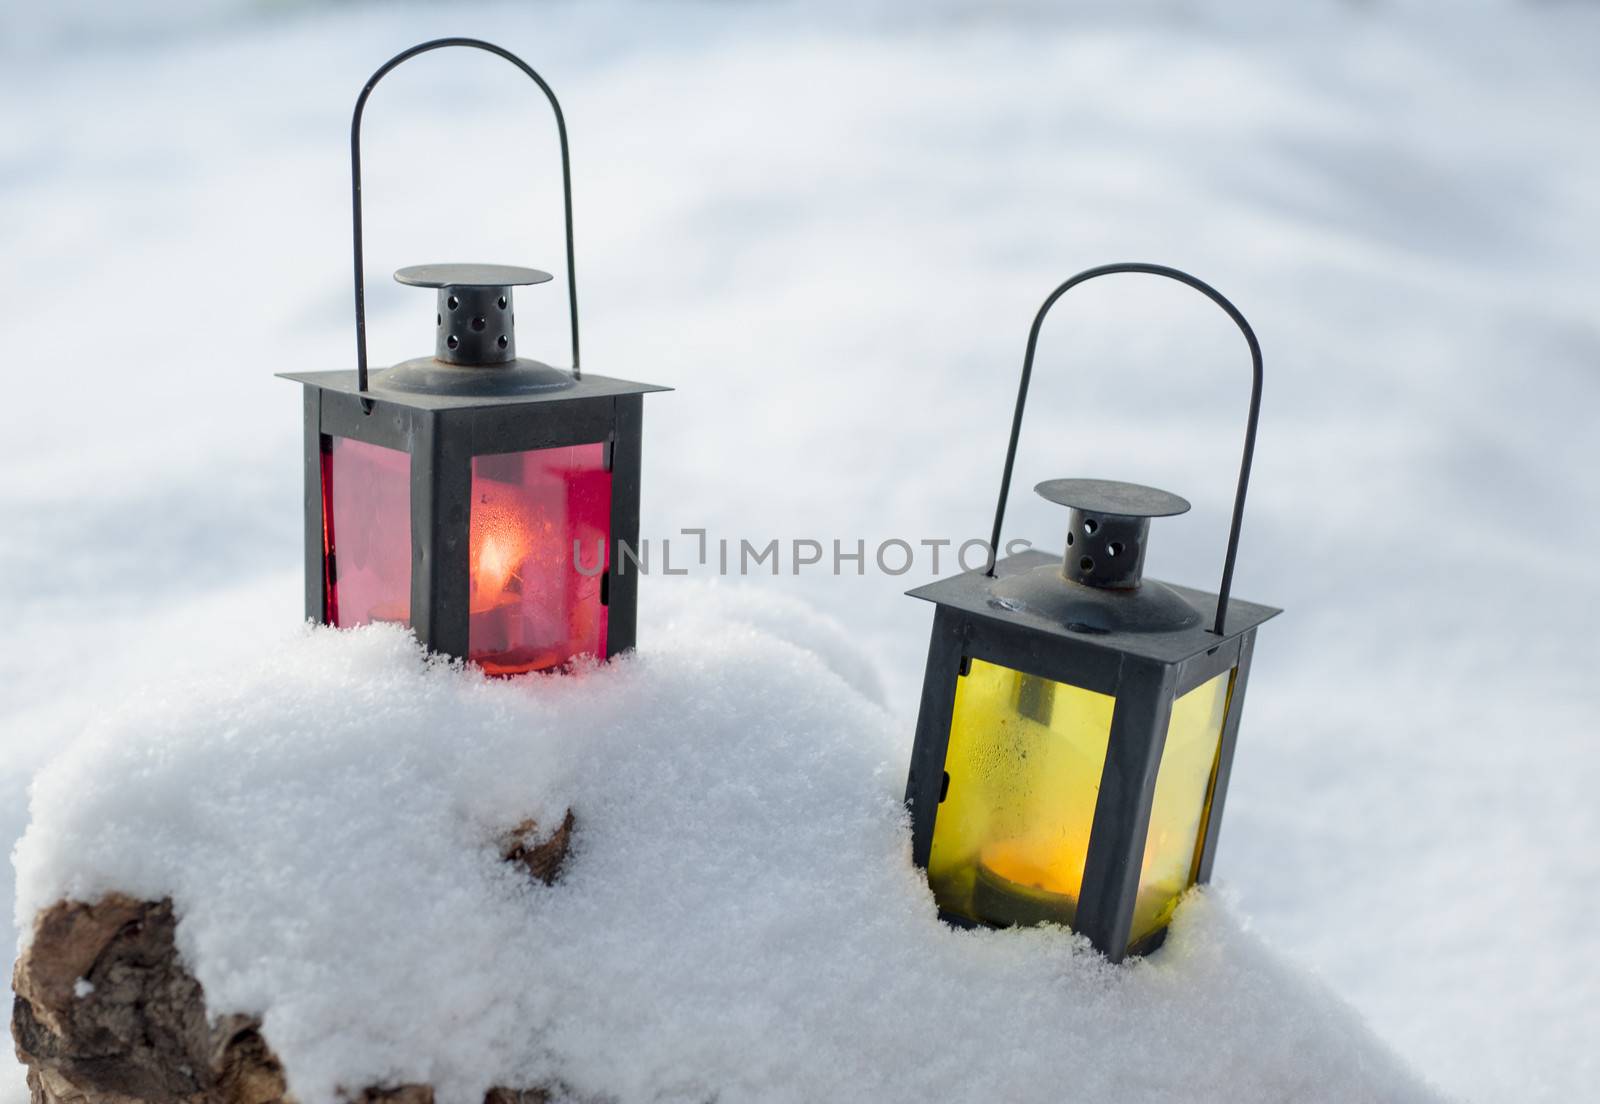 Two lamps set on the snow